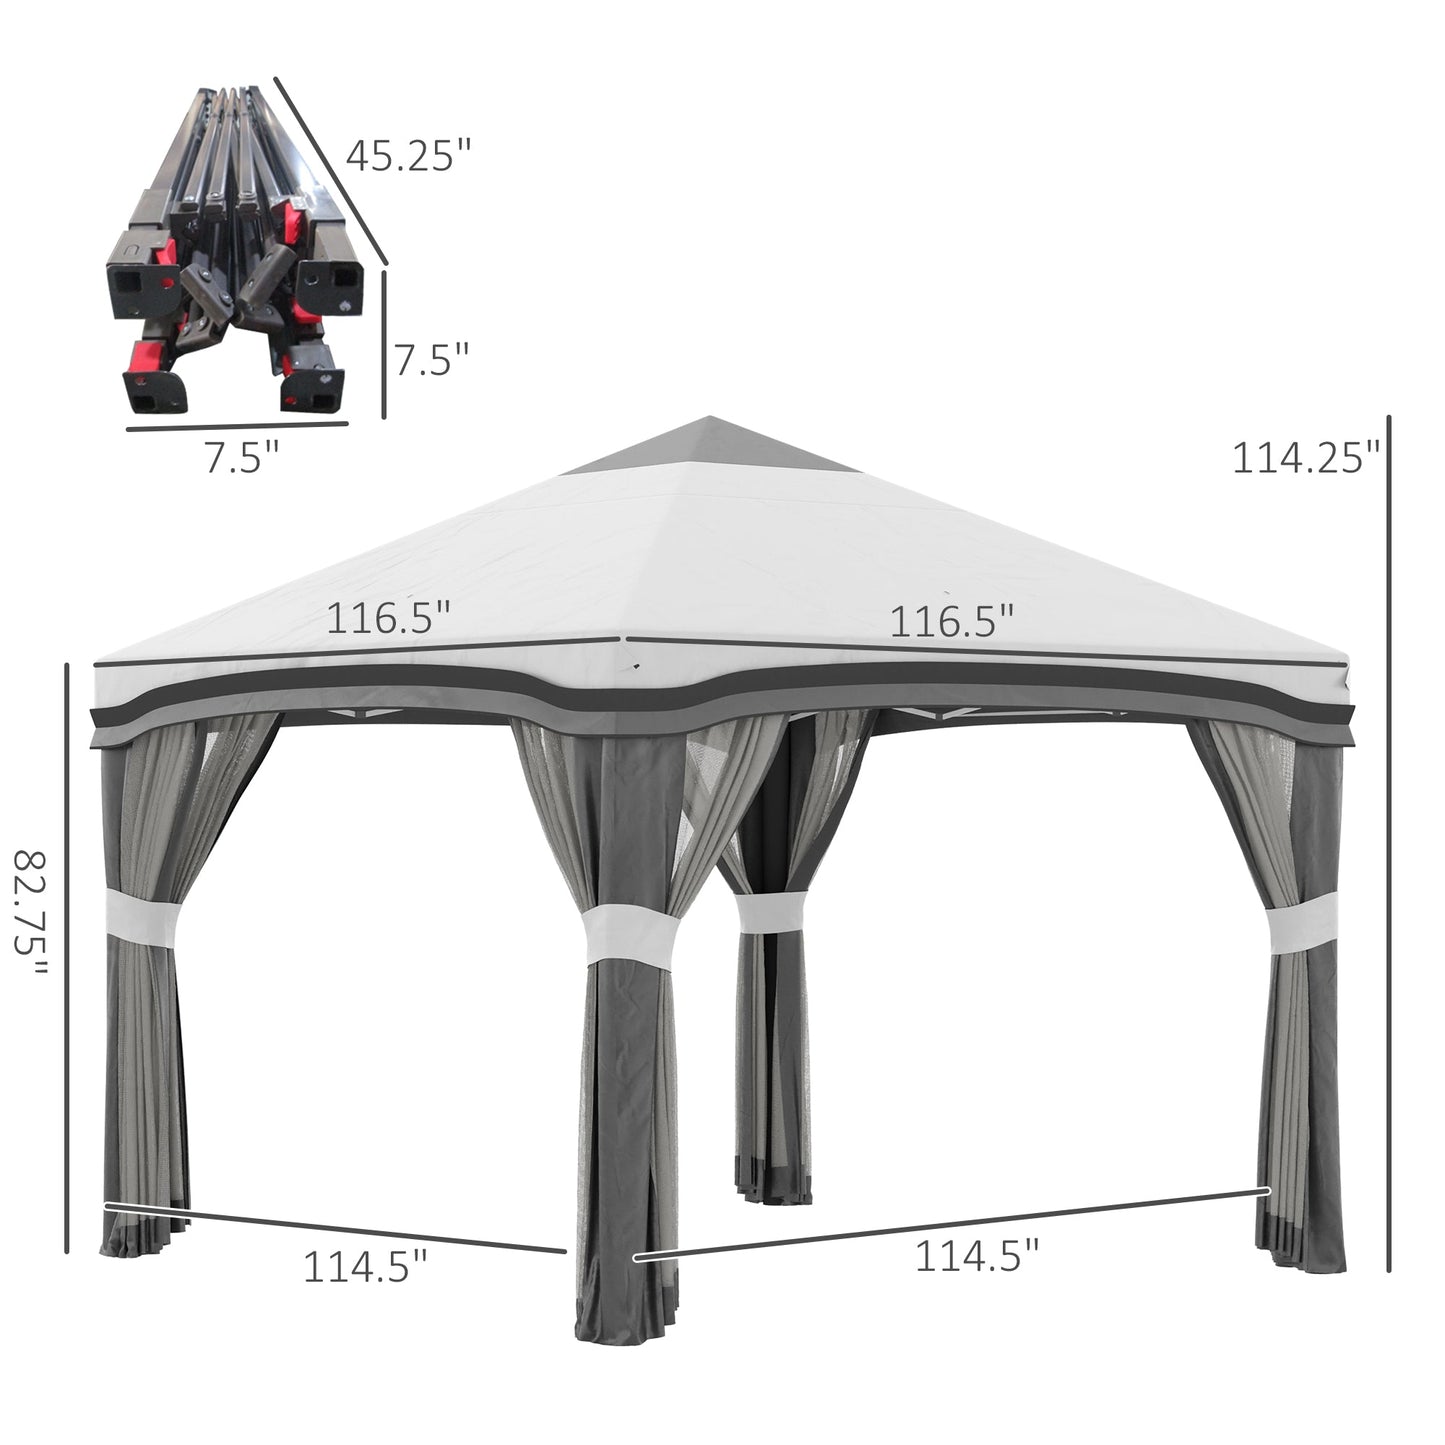 -Outsunny 10' x 10' Pop Up Canopy with Netting, Foldable Tents for Parties, Height Adjustable, with Wheeled Carry Bag and 4 Sand Bags for Outdoor, Garden, Patio, Gray - Outdoor Style Company